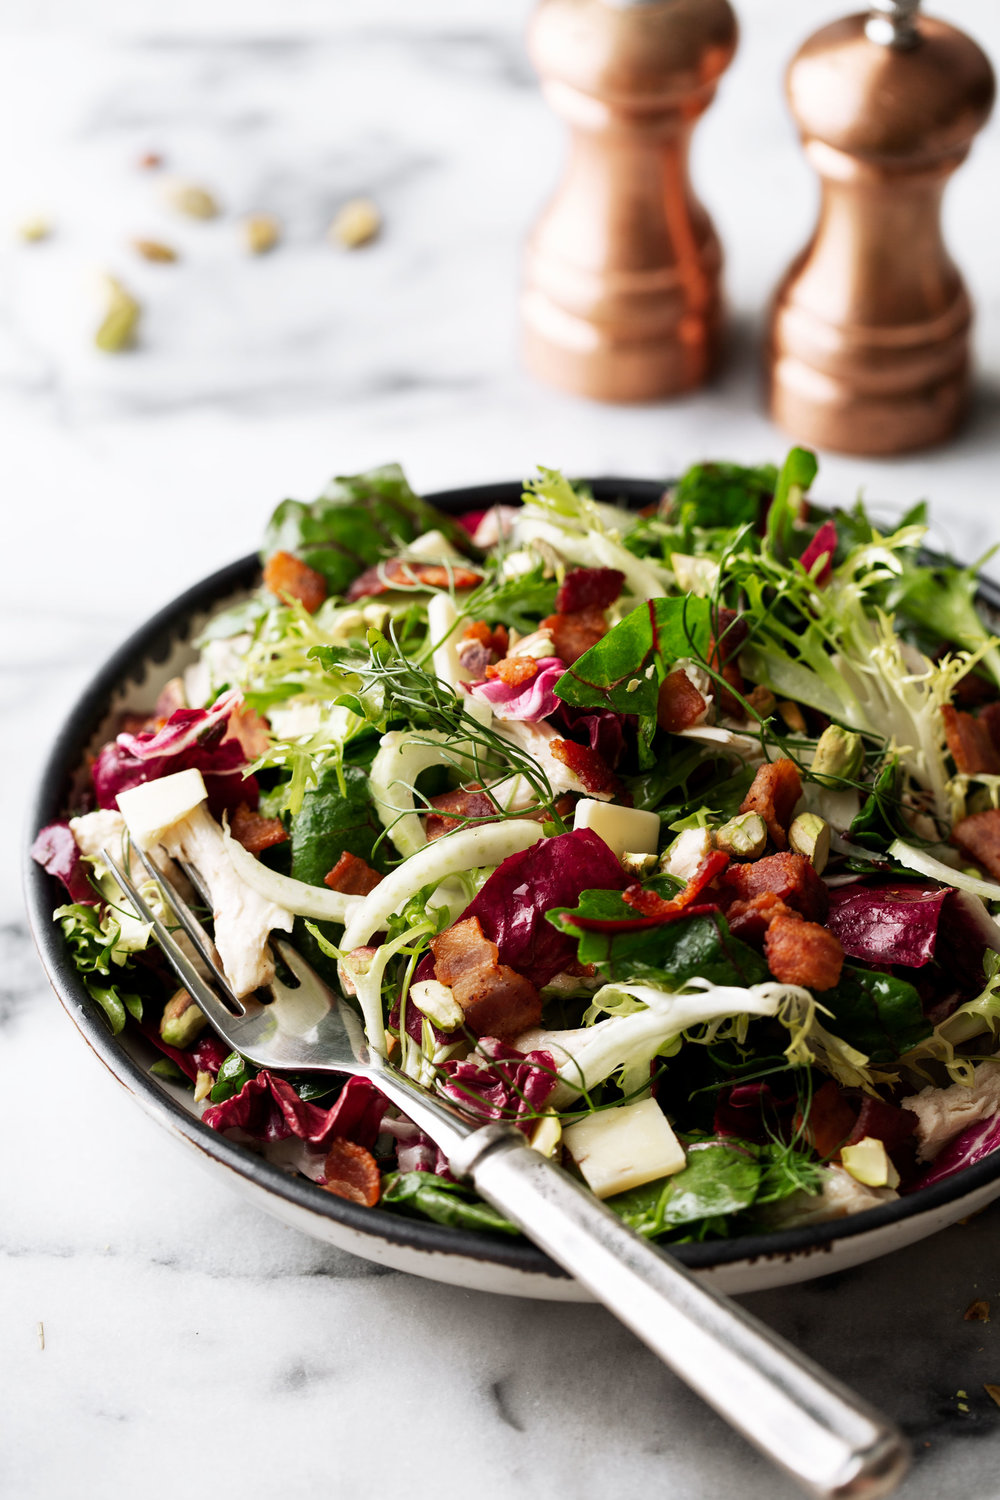 Mesclun Greens & Poached Chicken Salad with fennel and bacon